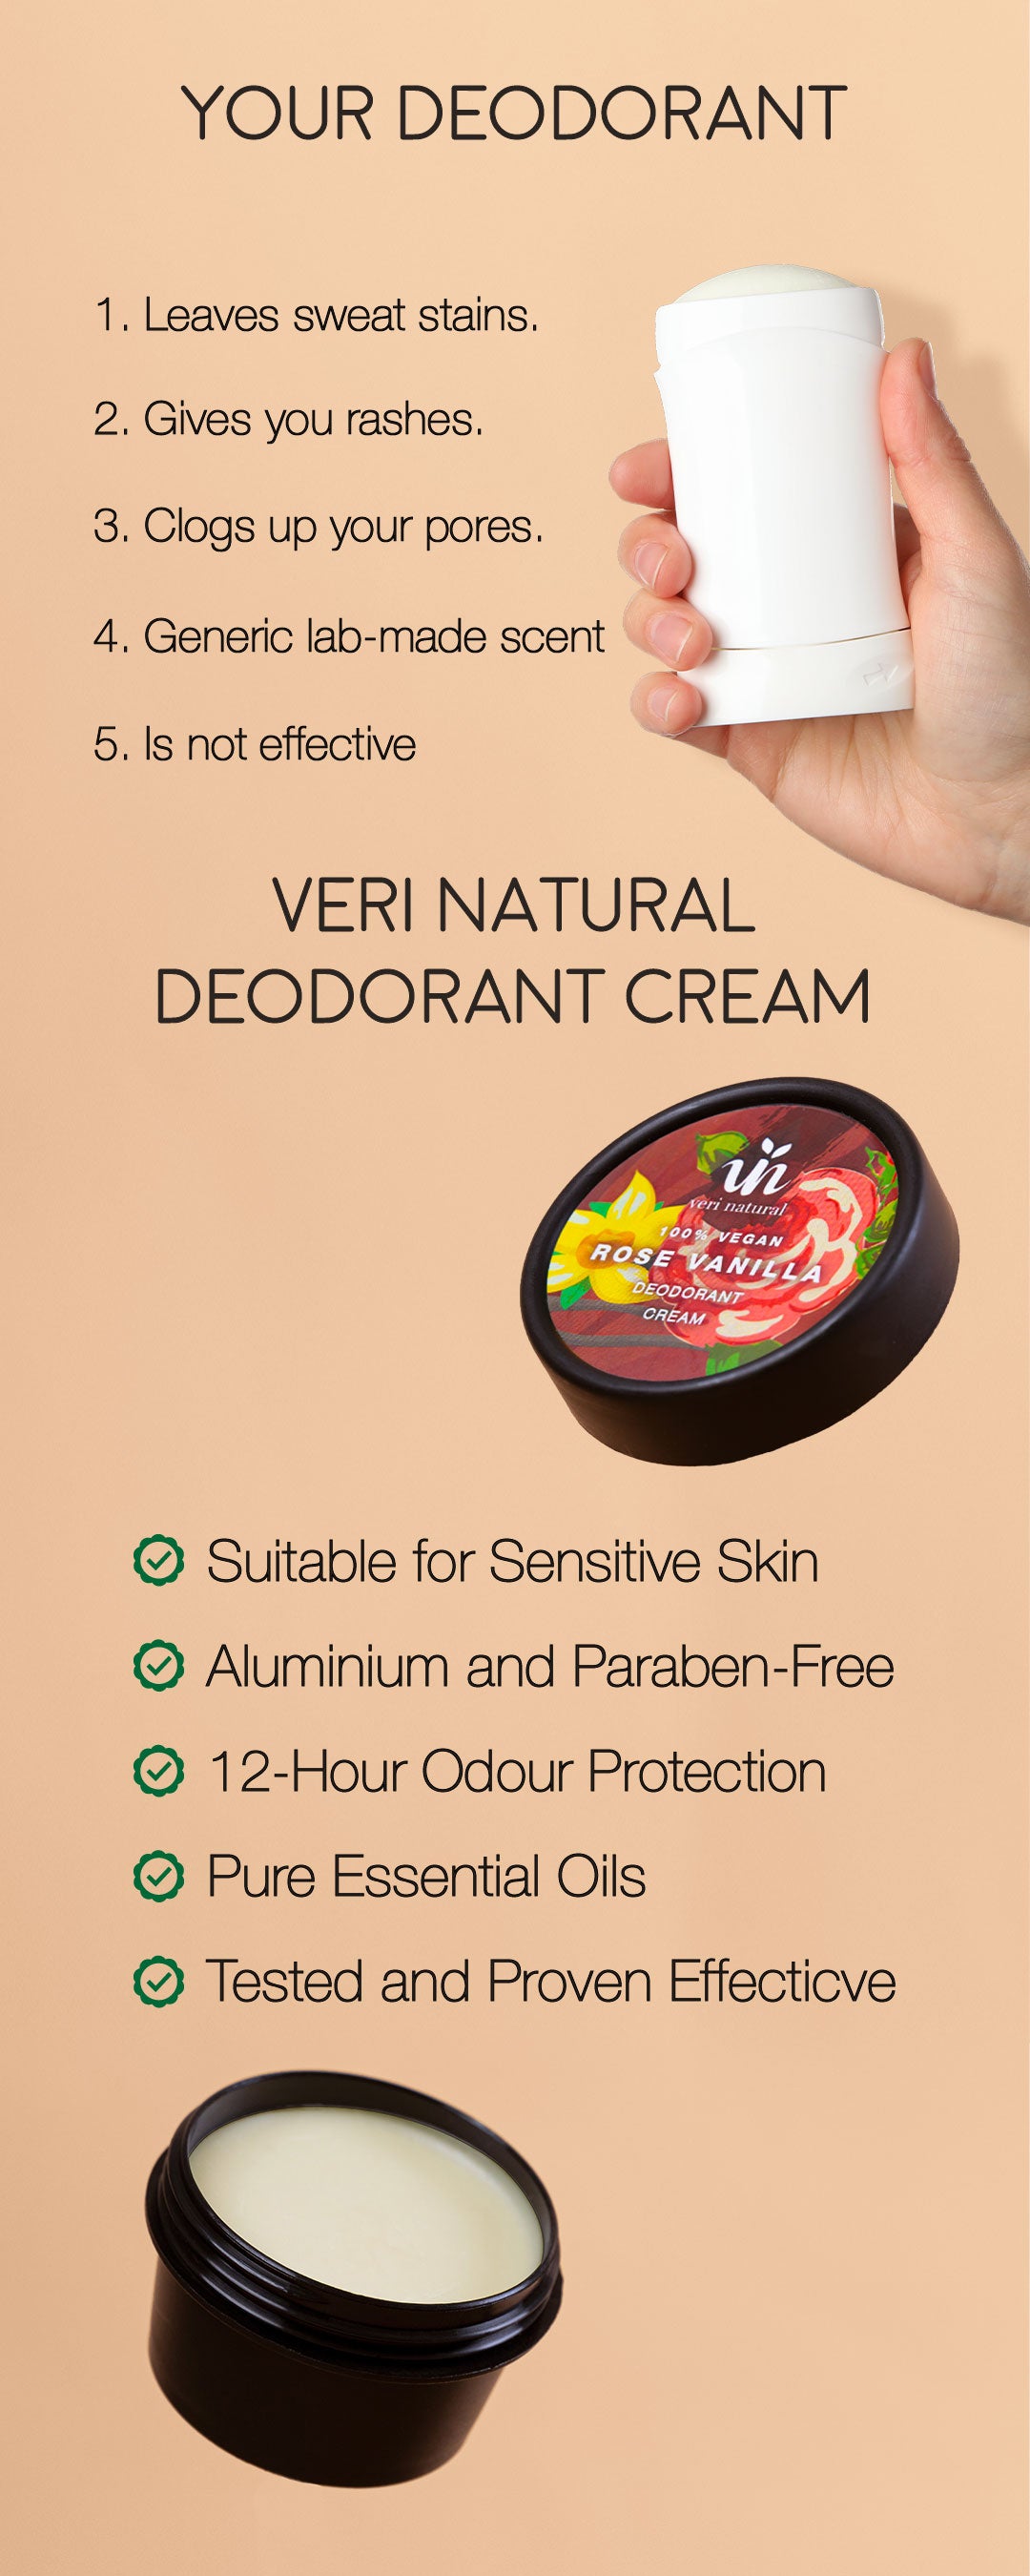 Why you need to choose Veri Natural deodorant